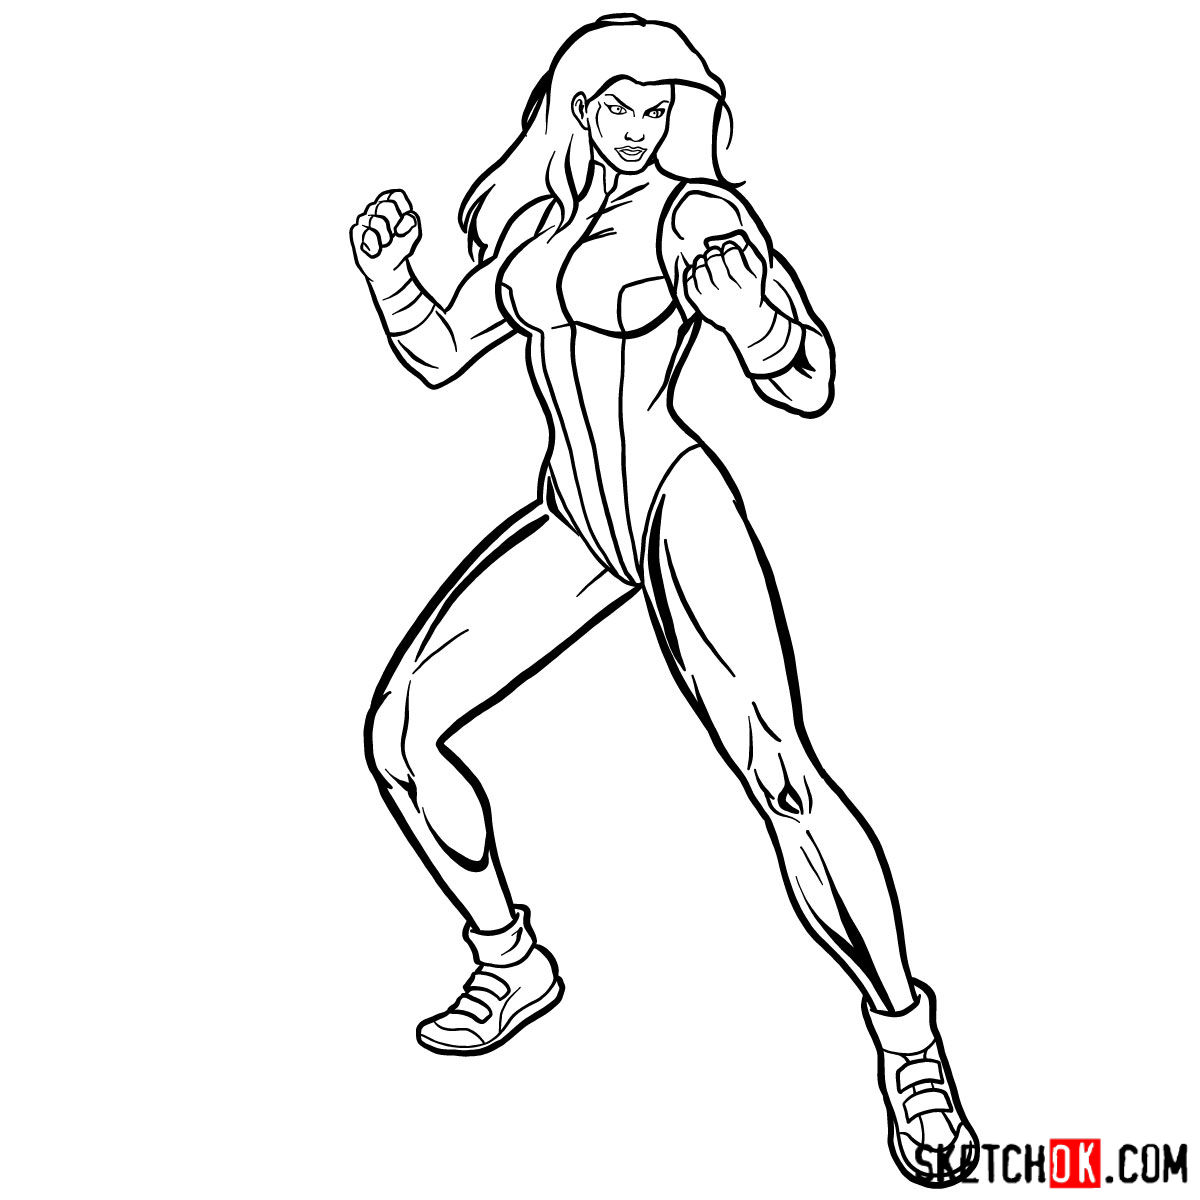 How to draw She-Hulk (Jennifer Walters) from Marvel - step 14